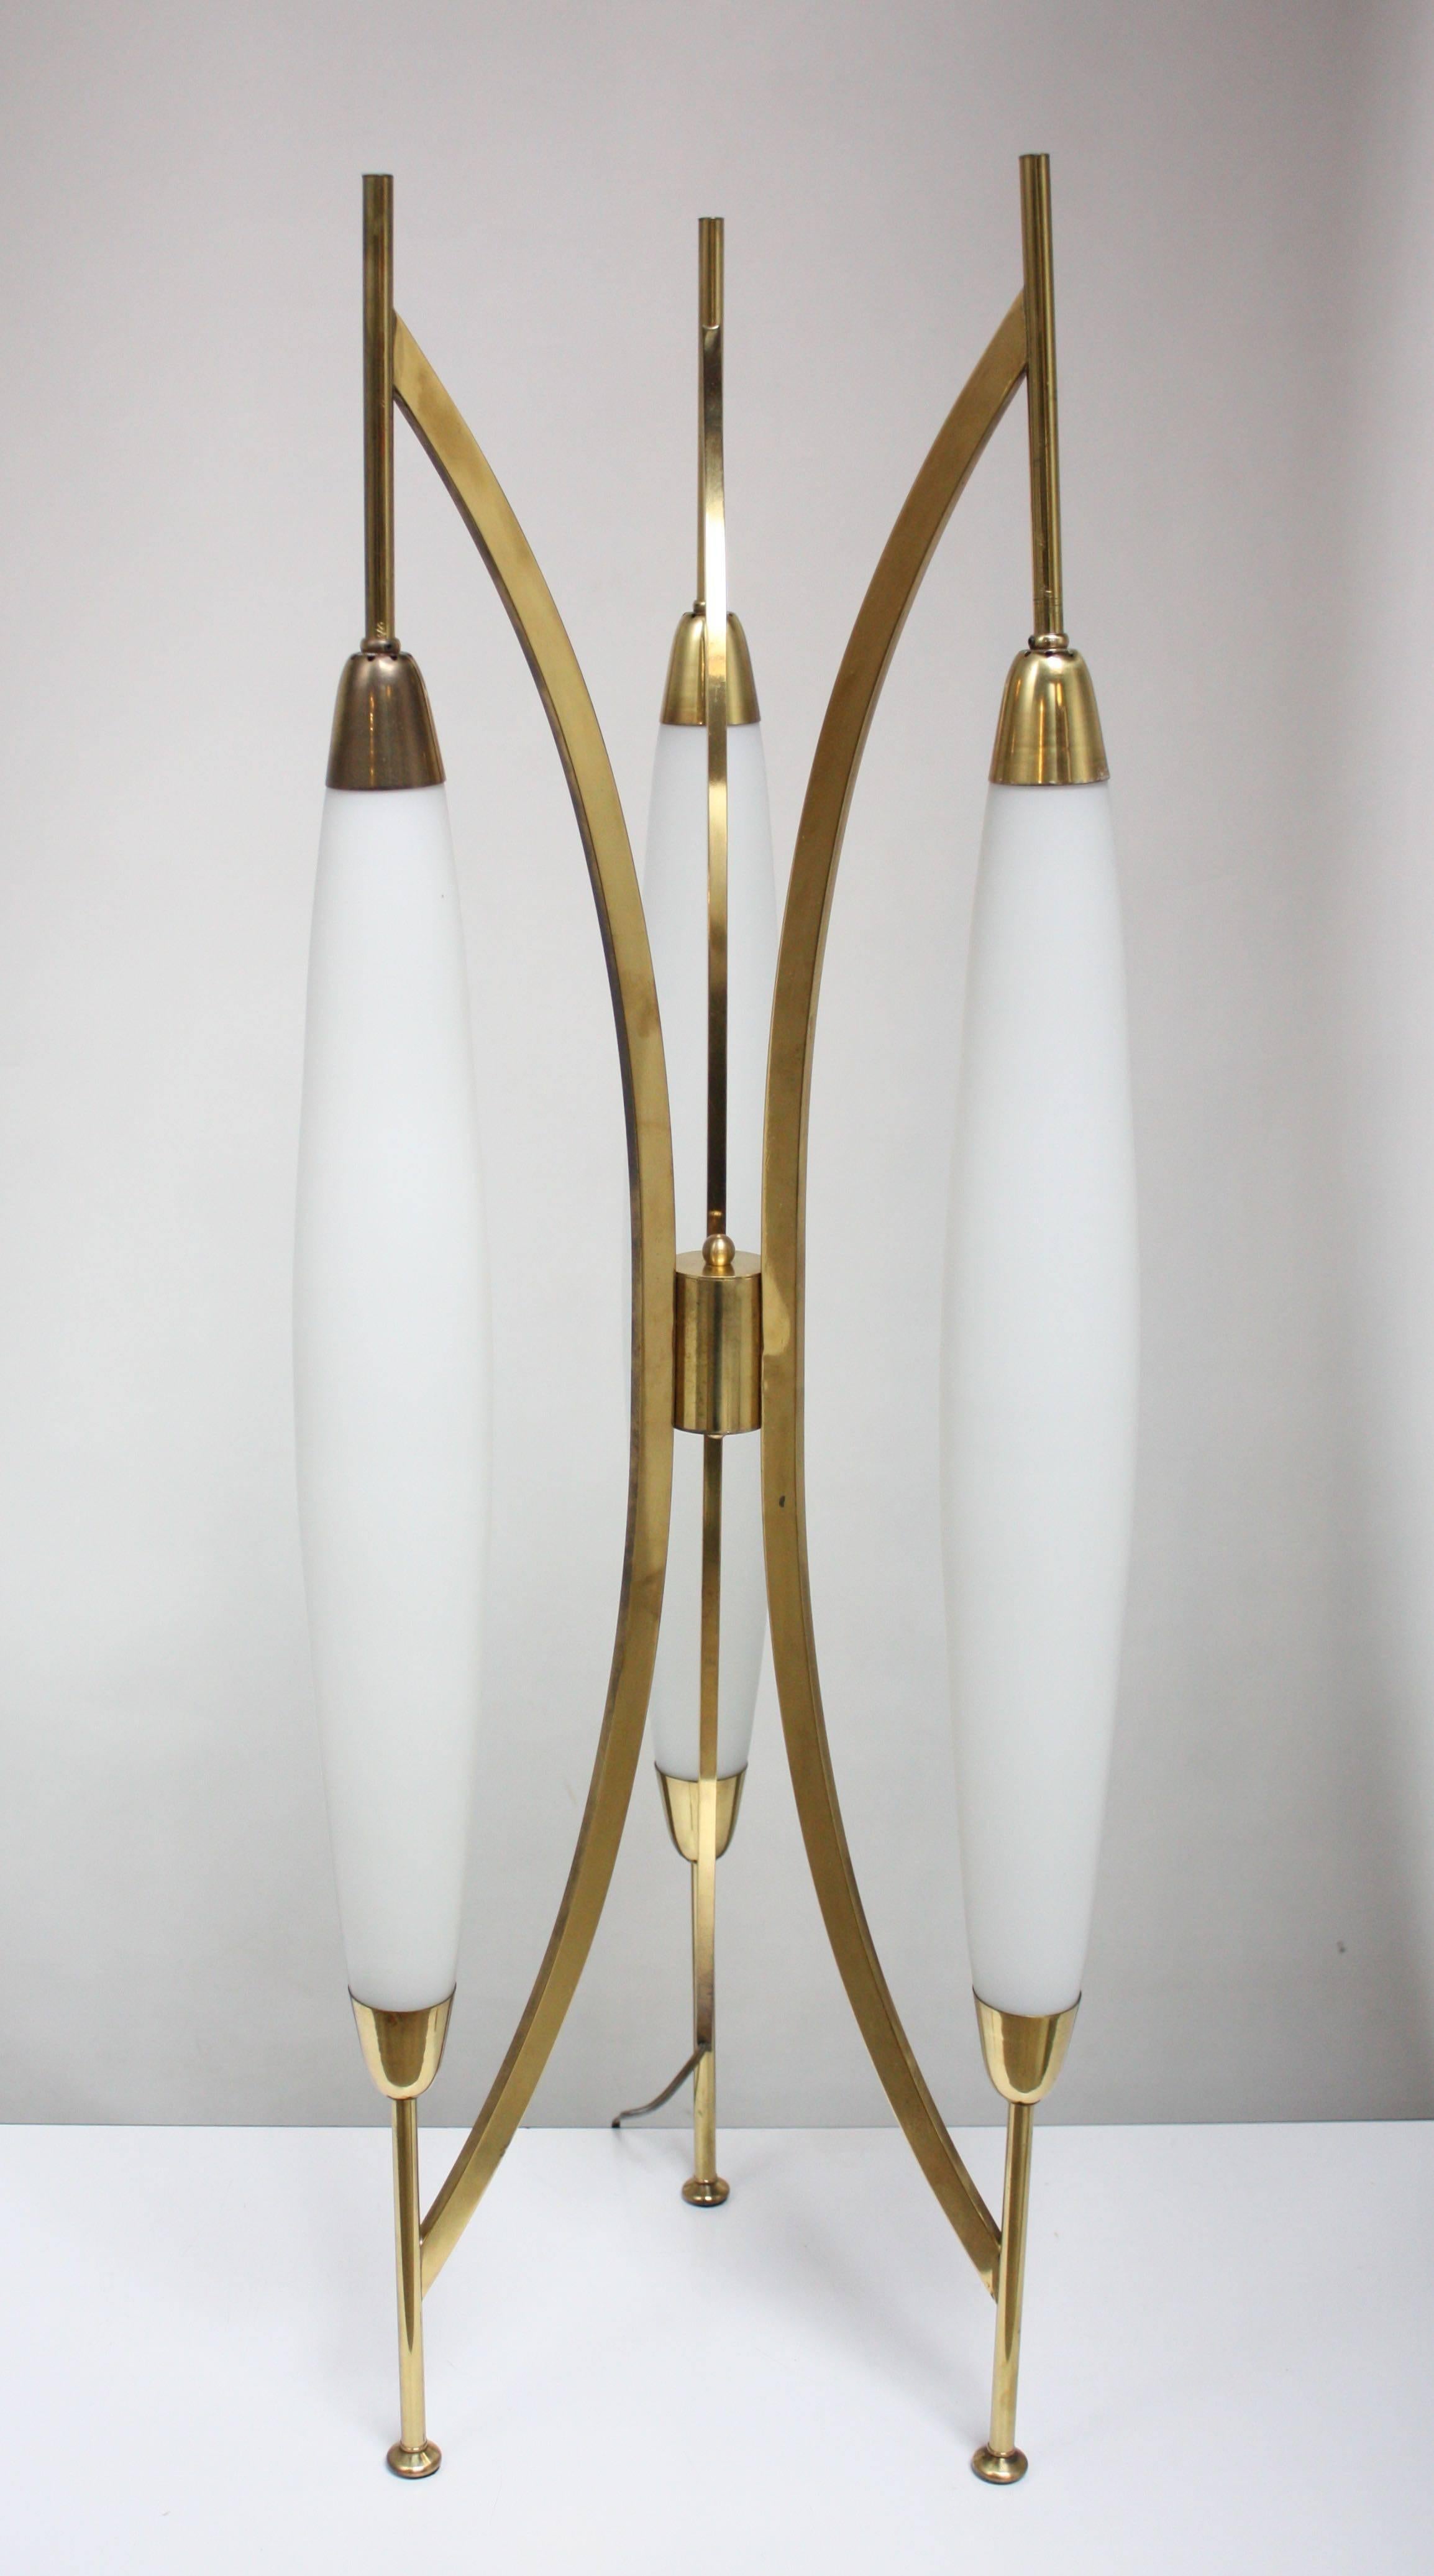 Six-socket brass and frosted glass lamp with three-way illumination setting (ca. 1960s, USA). 
Felted feet suggest that the piece was designed as an oversized table lamp (works well on a credenza or larger surface), but also works well as a shorter